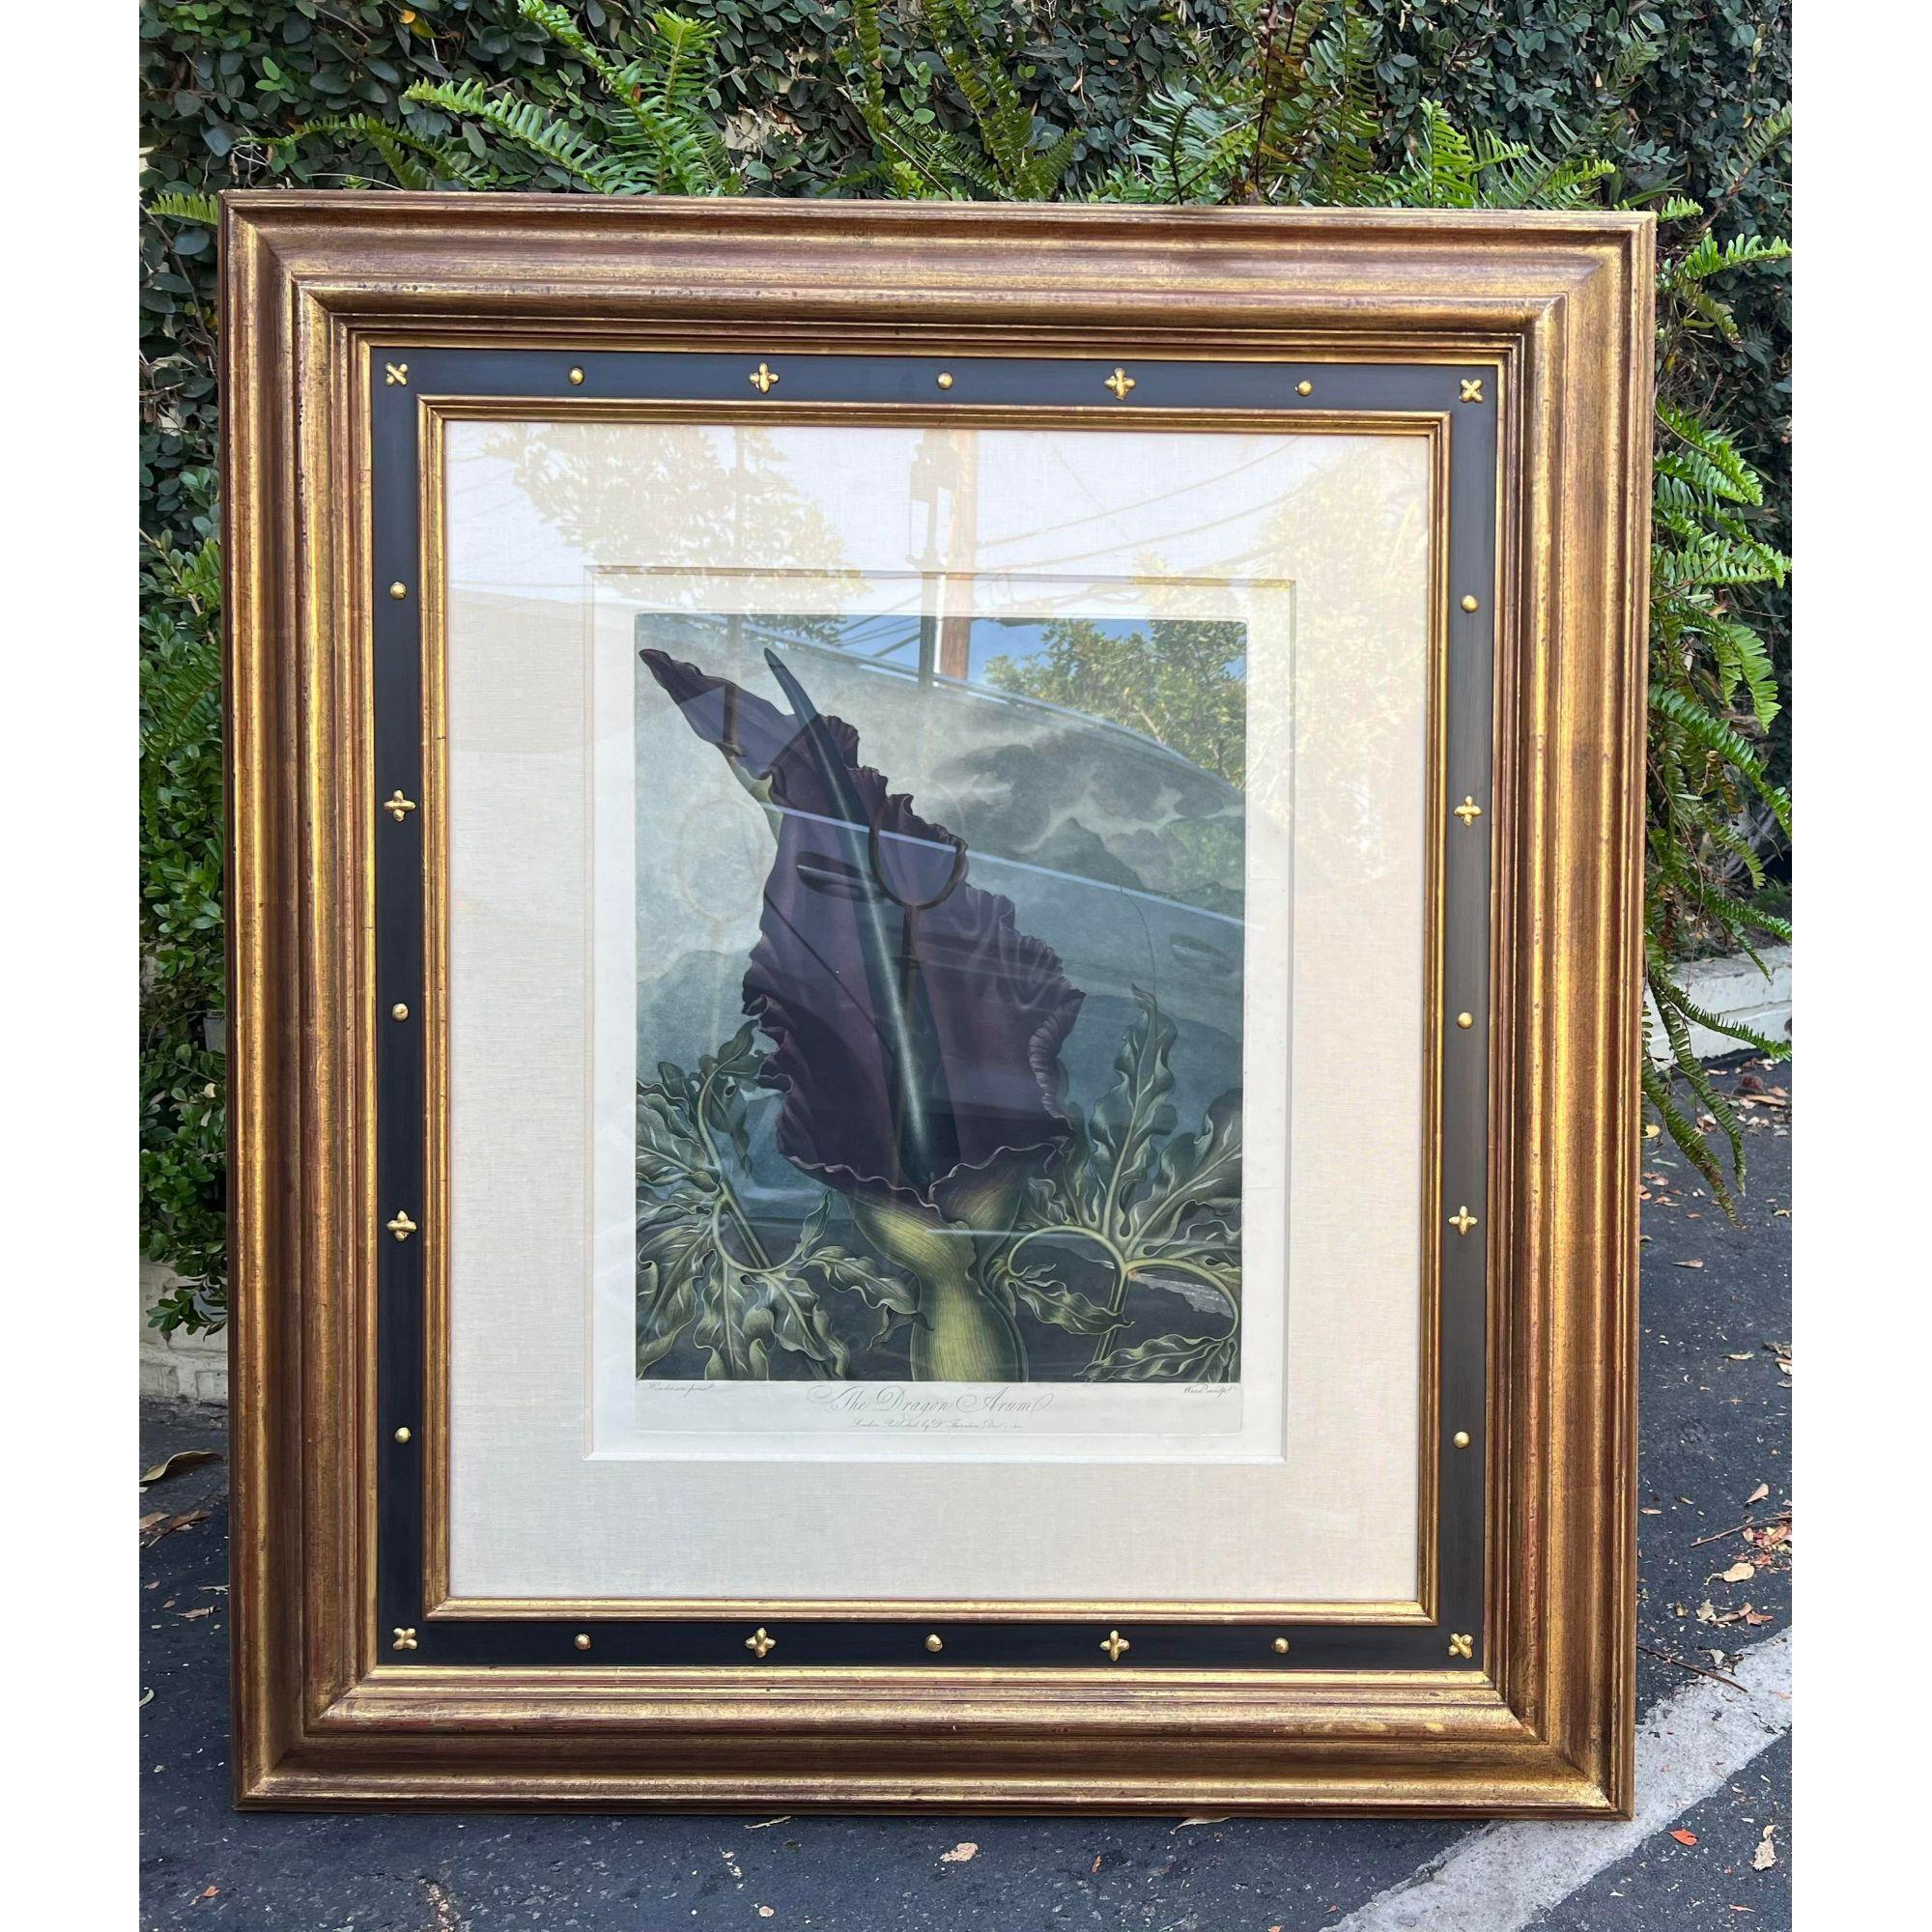 Antique botanical print - the dragon arum by Thornton, Robert John c.1804. It is exquisitely framed in a gold and black empire style star clad giltwood frame. 

Additional information: 
Materials: giltwood, paper
Color: blue
Period: early 19th